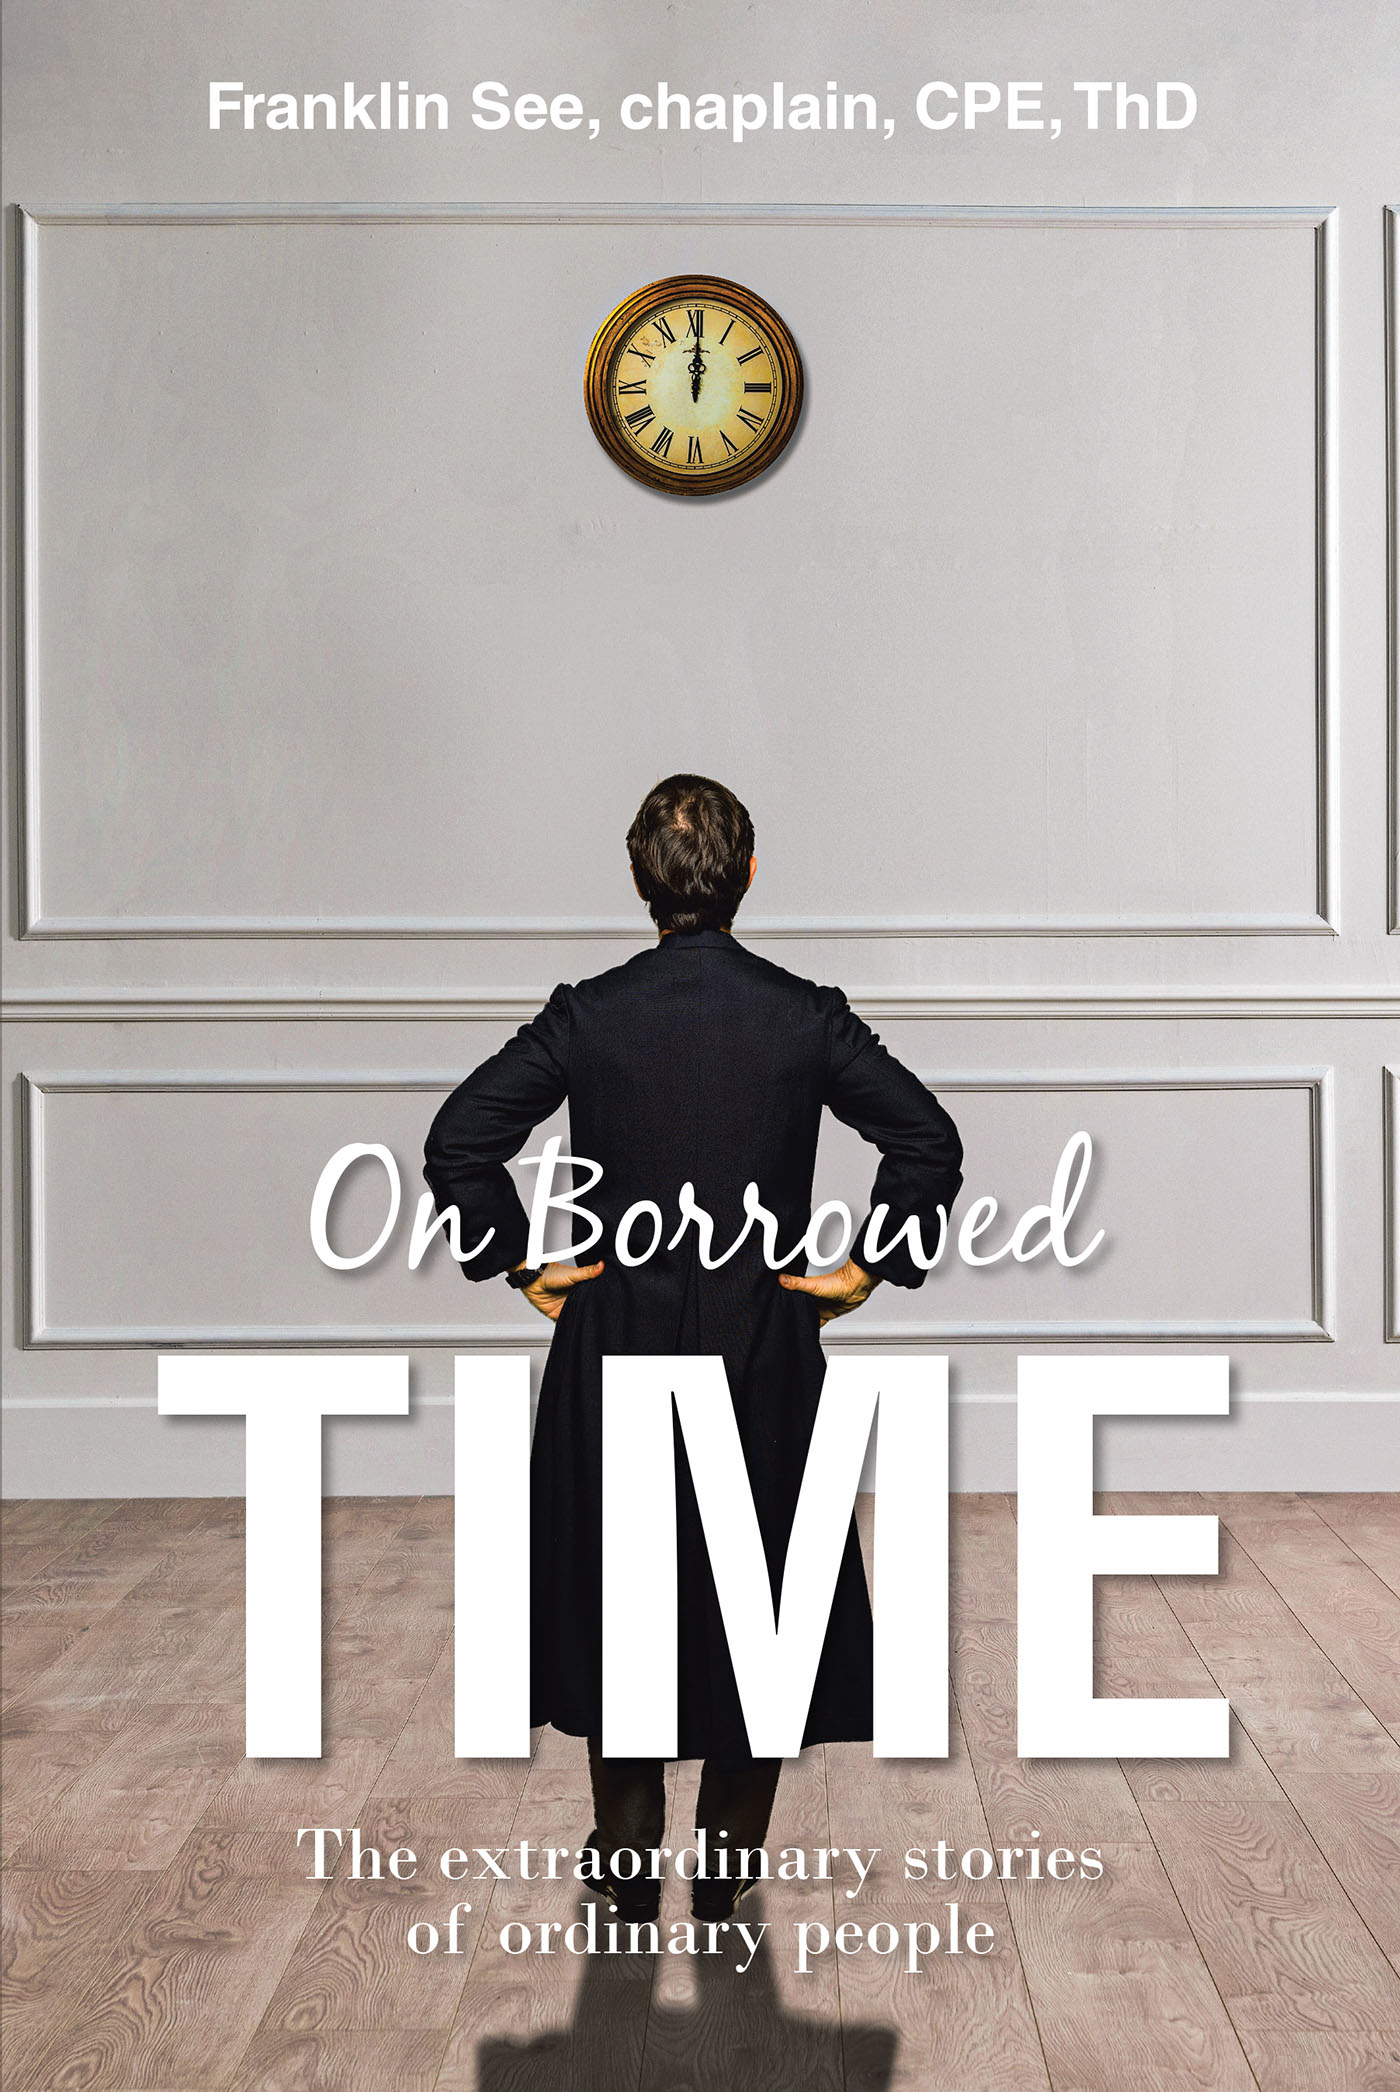 Franklin See, Chaplain, CPE, ThD’s Newly Released “On Borrowed Time: The extraordinary stories of ordinary people” is a Thoughtful Discussion of Finding One’s Faith